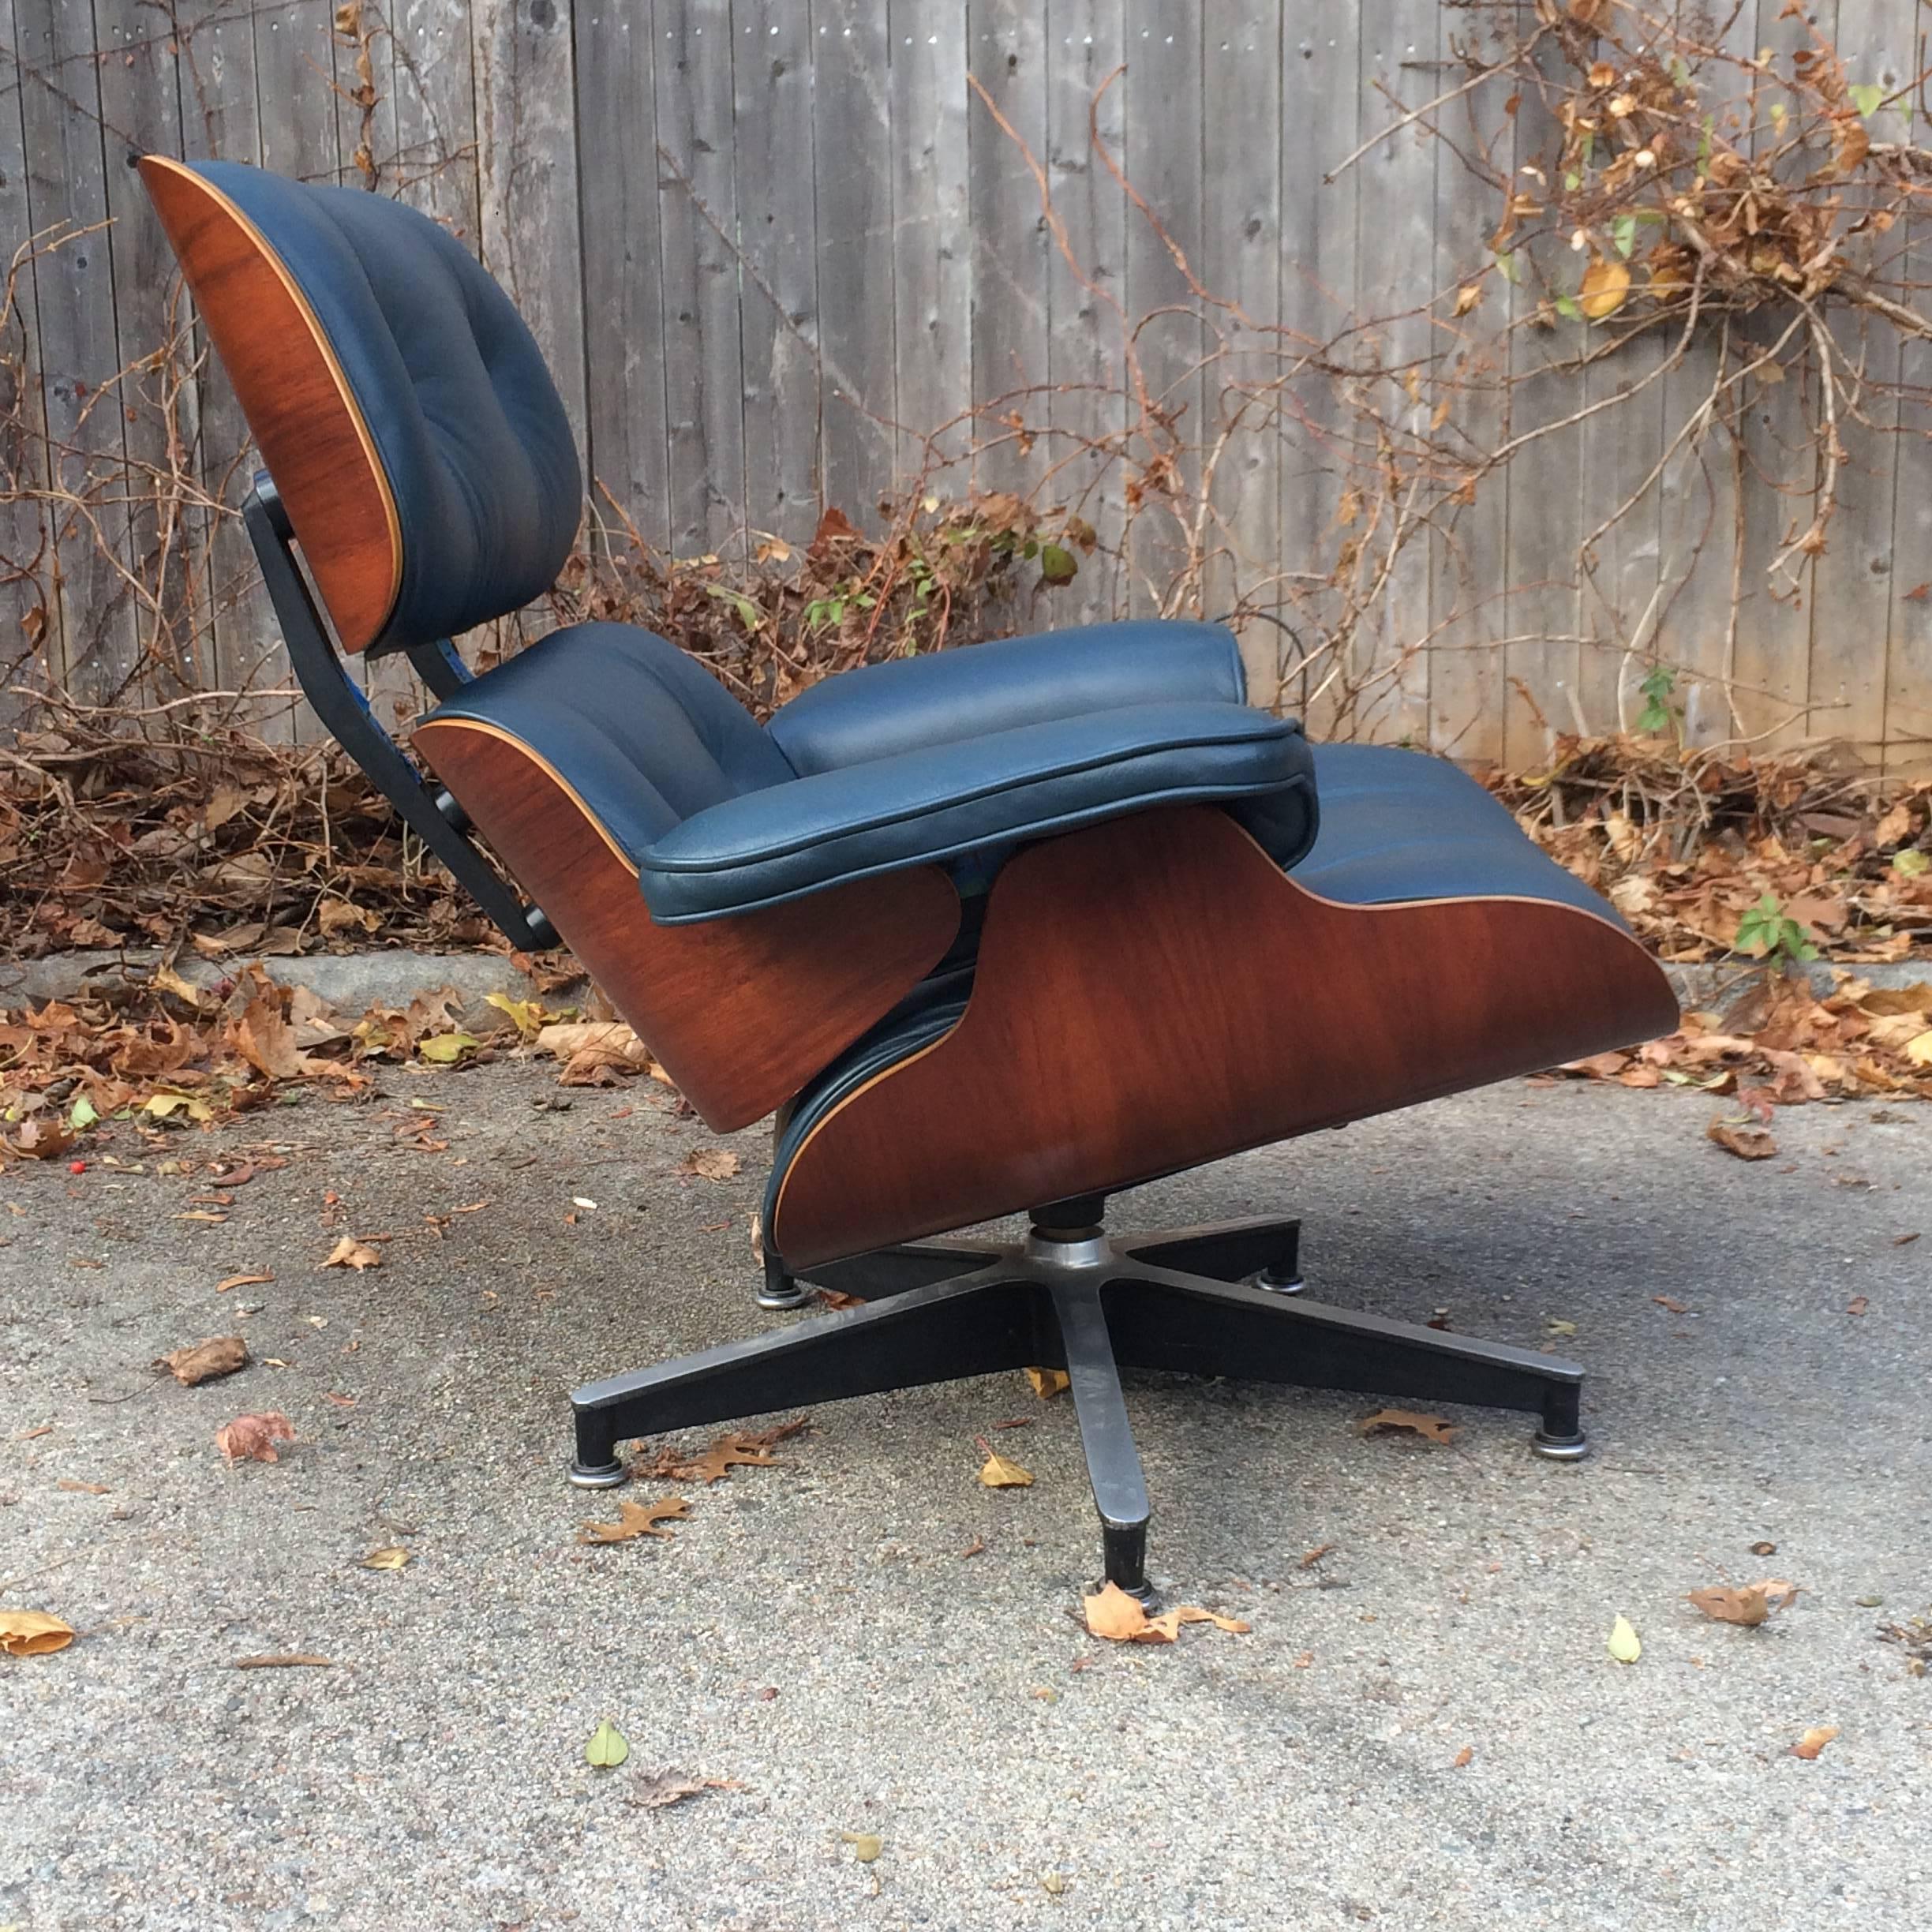 Late 20th Century Rare Navy Blue Herman Miller Eames Lounge Chair Set